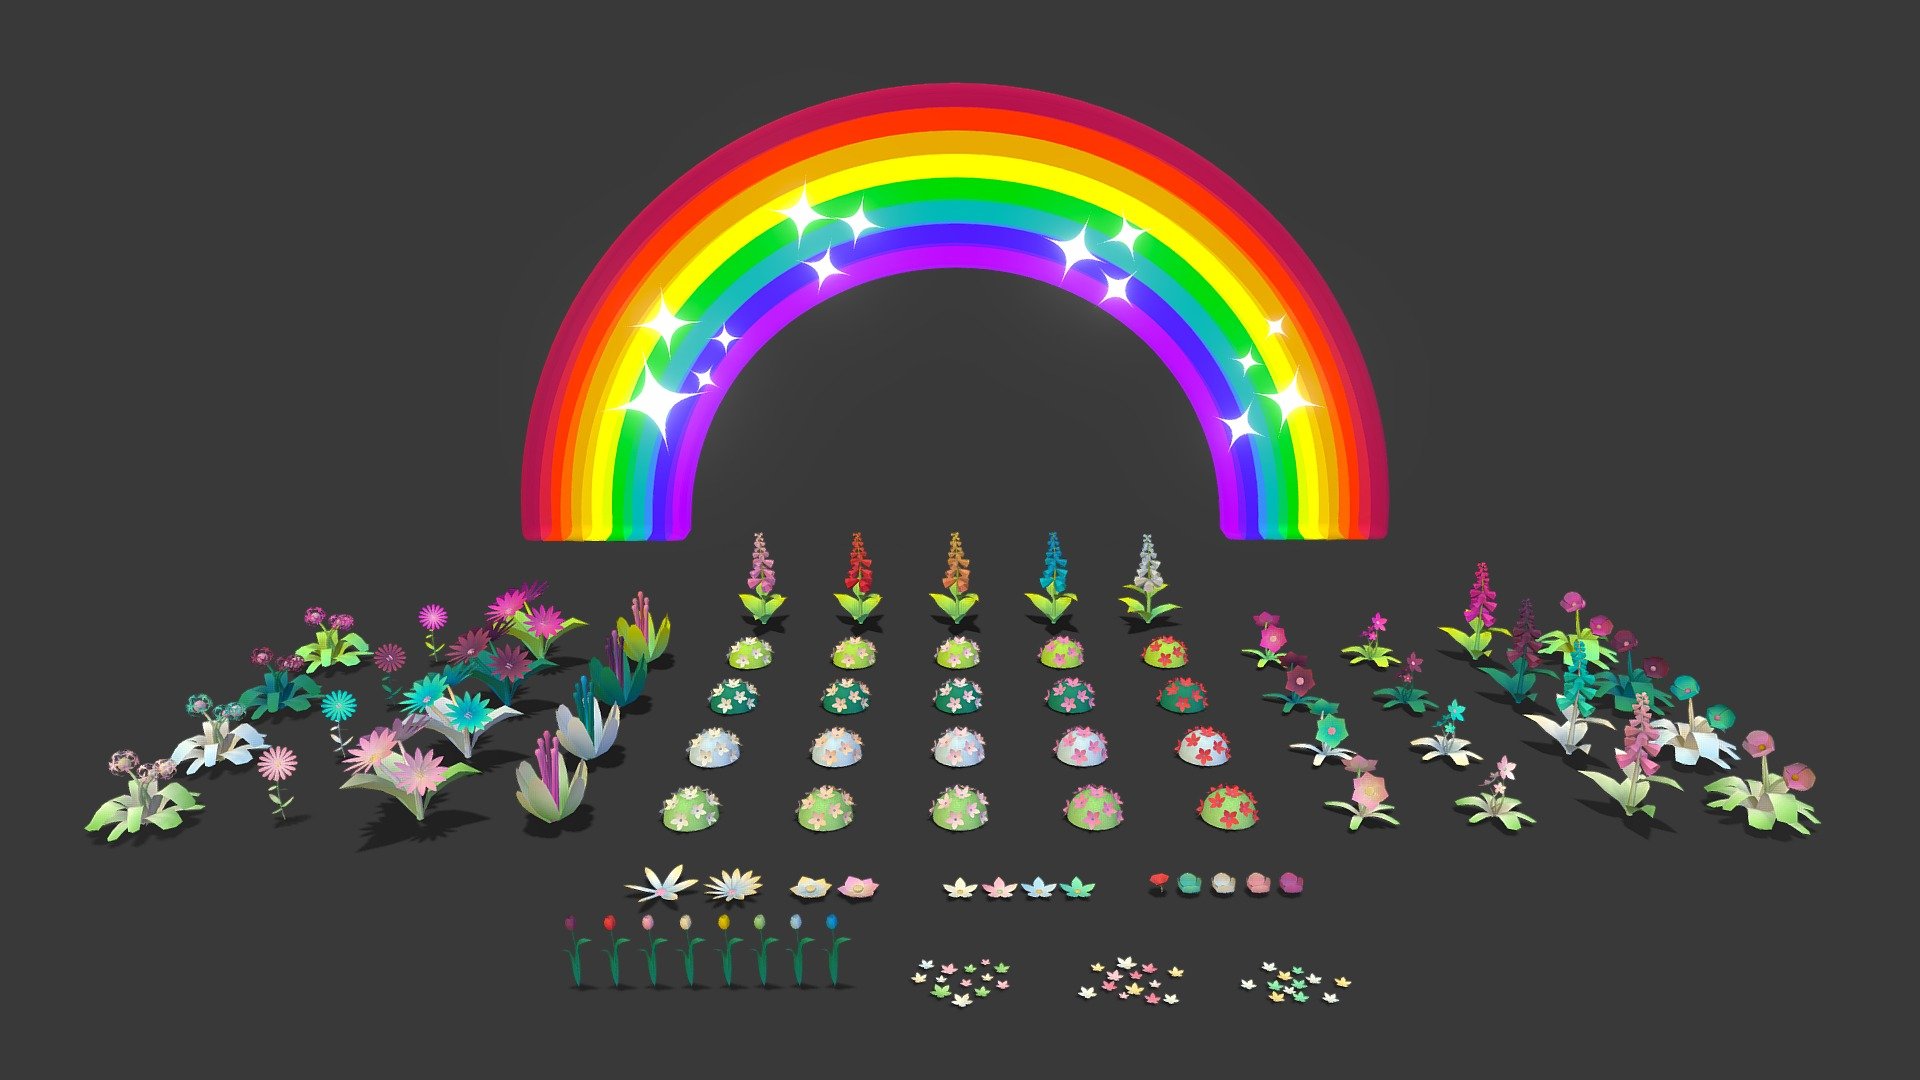 Game ready Flower/Nature pack that i made. 
- Plants/Flowers/Roses/Bushes come in 4 different colour variations. 
- Each flower is an individual mesh so you can tweak position, rotation and scale.
- Also included is an animated rainbow model that i've made. (30 fps) 3d model